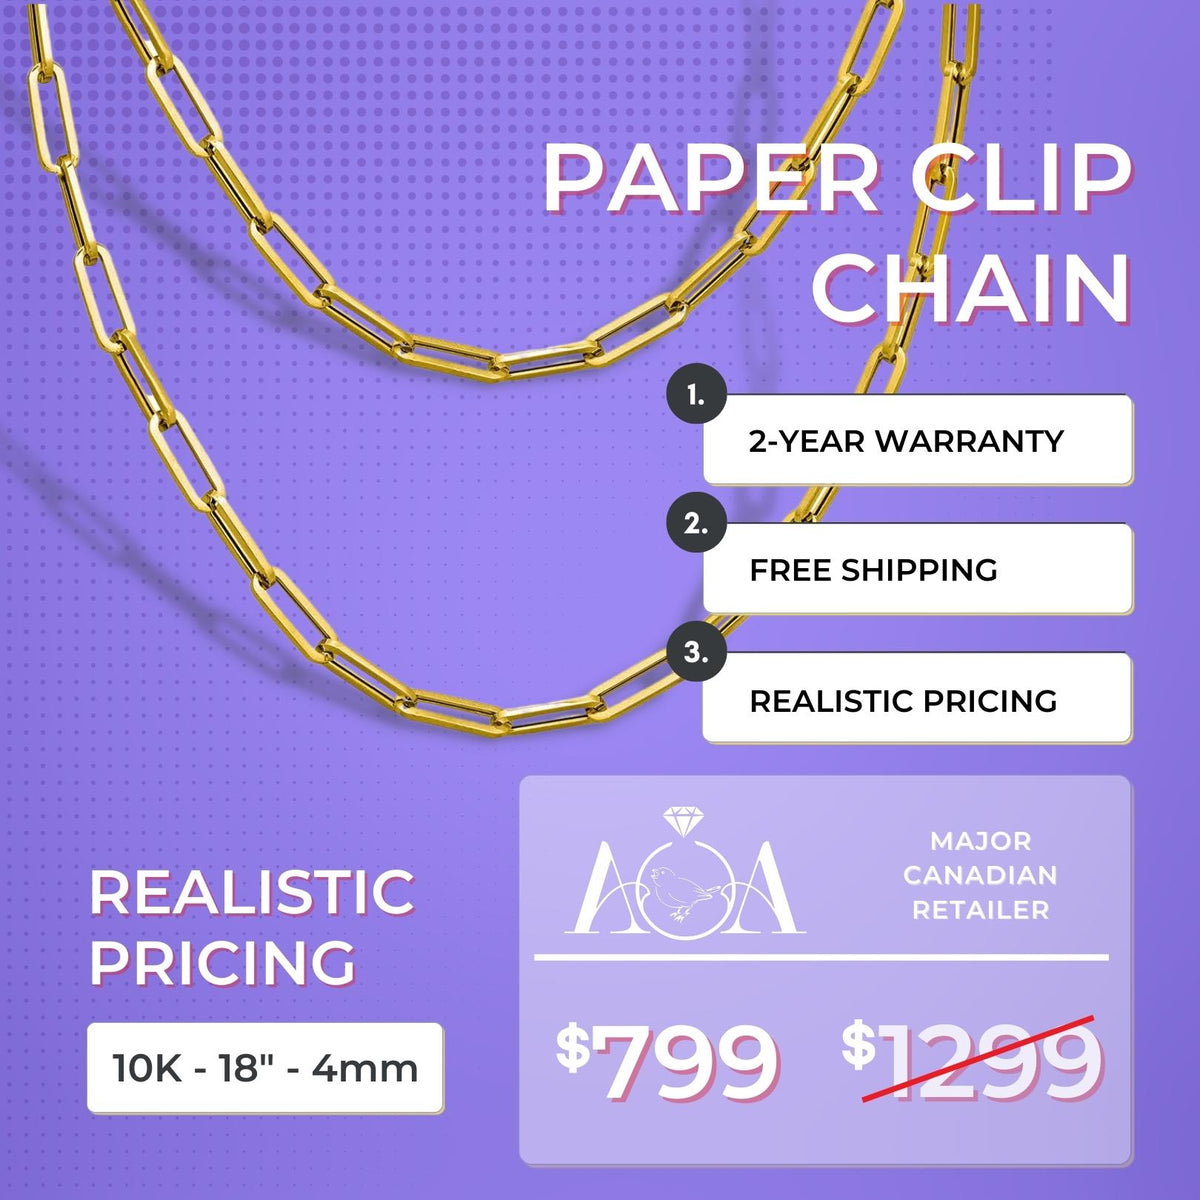 Price Compare Paper Clip Chains to Major Canadian Retailer